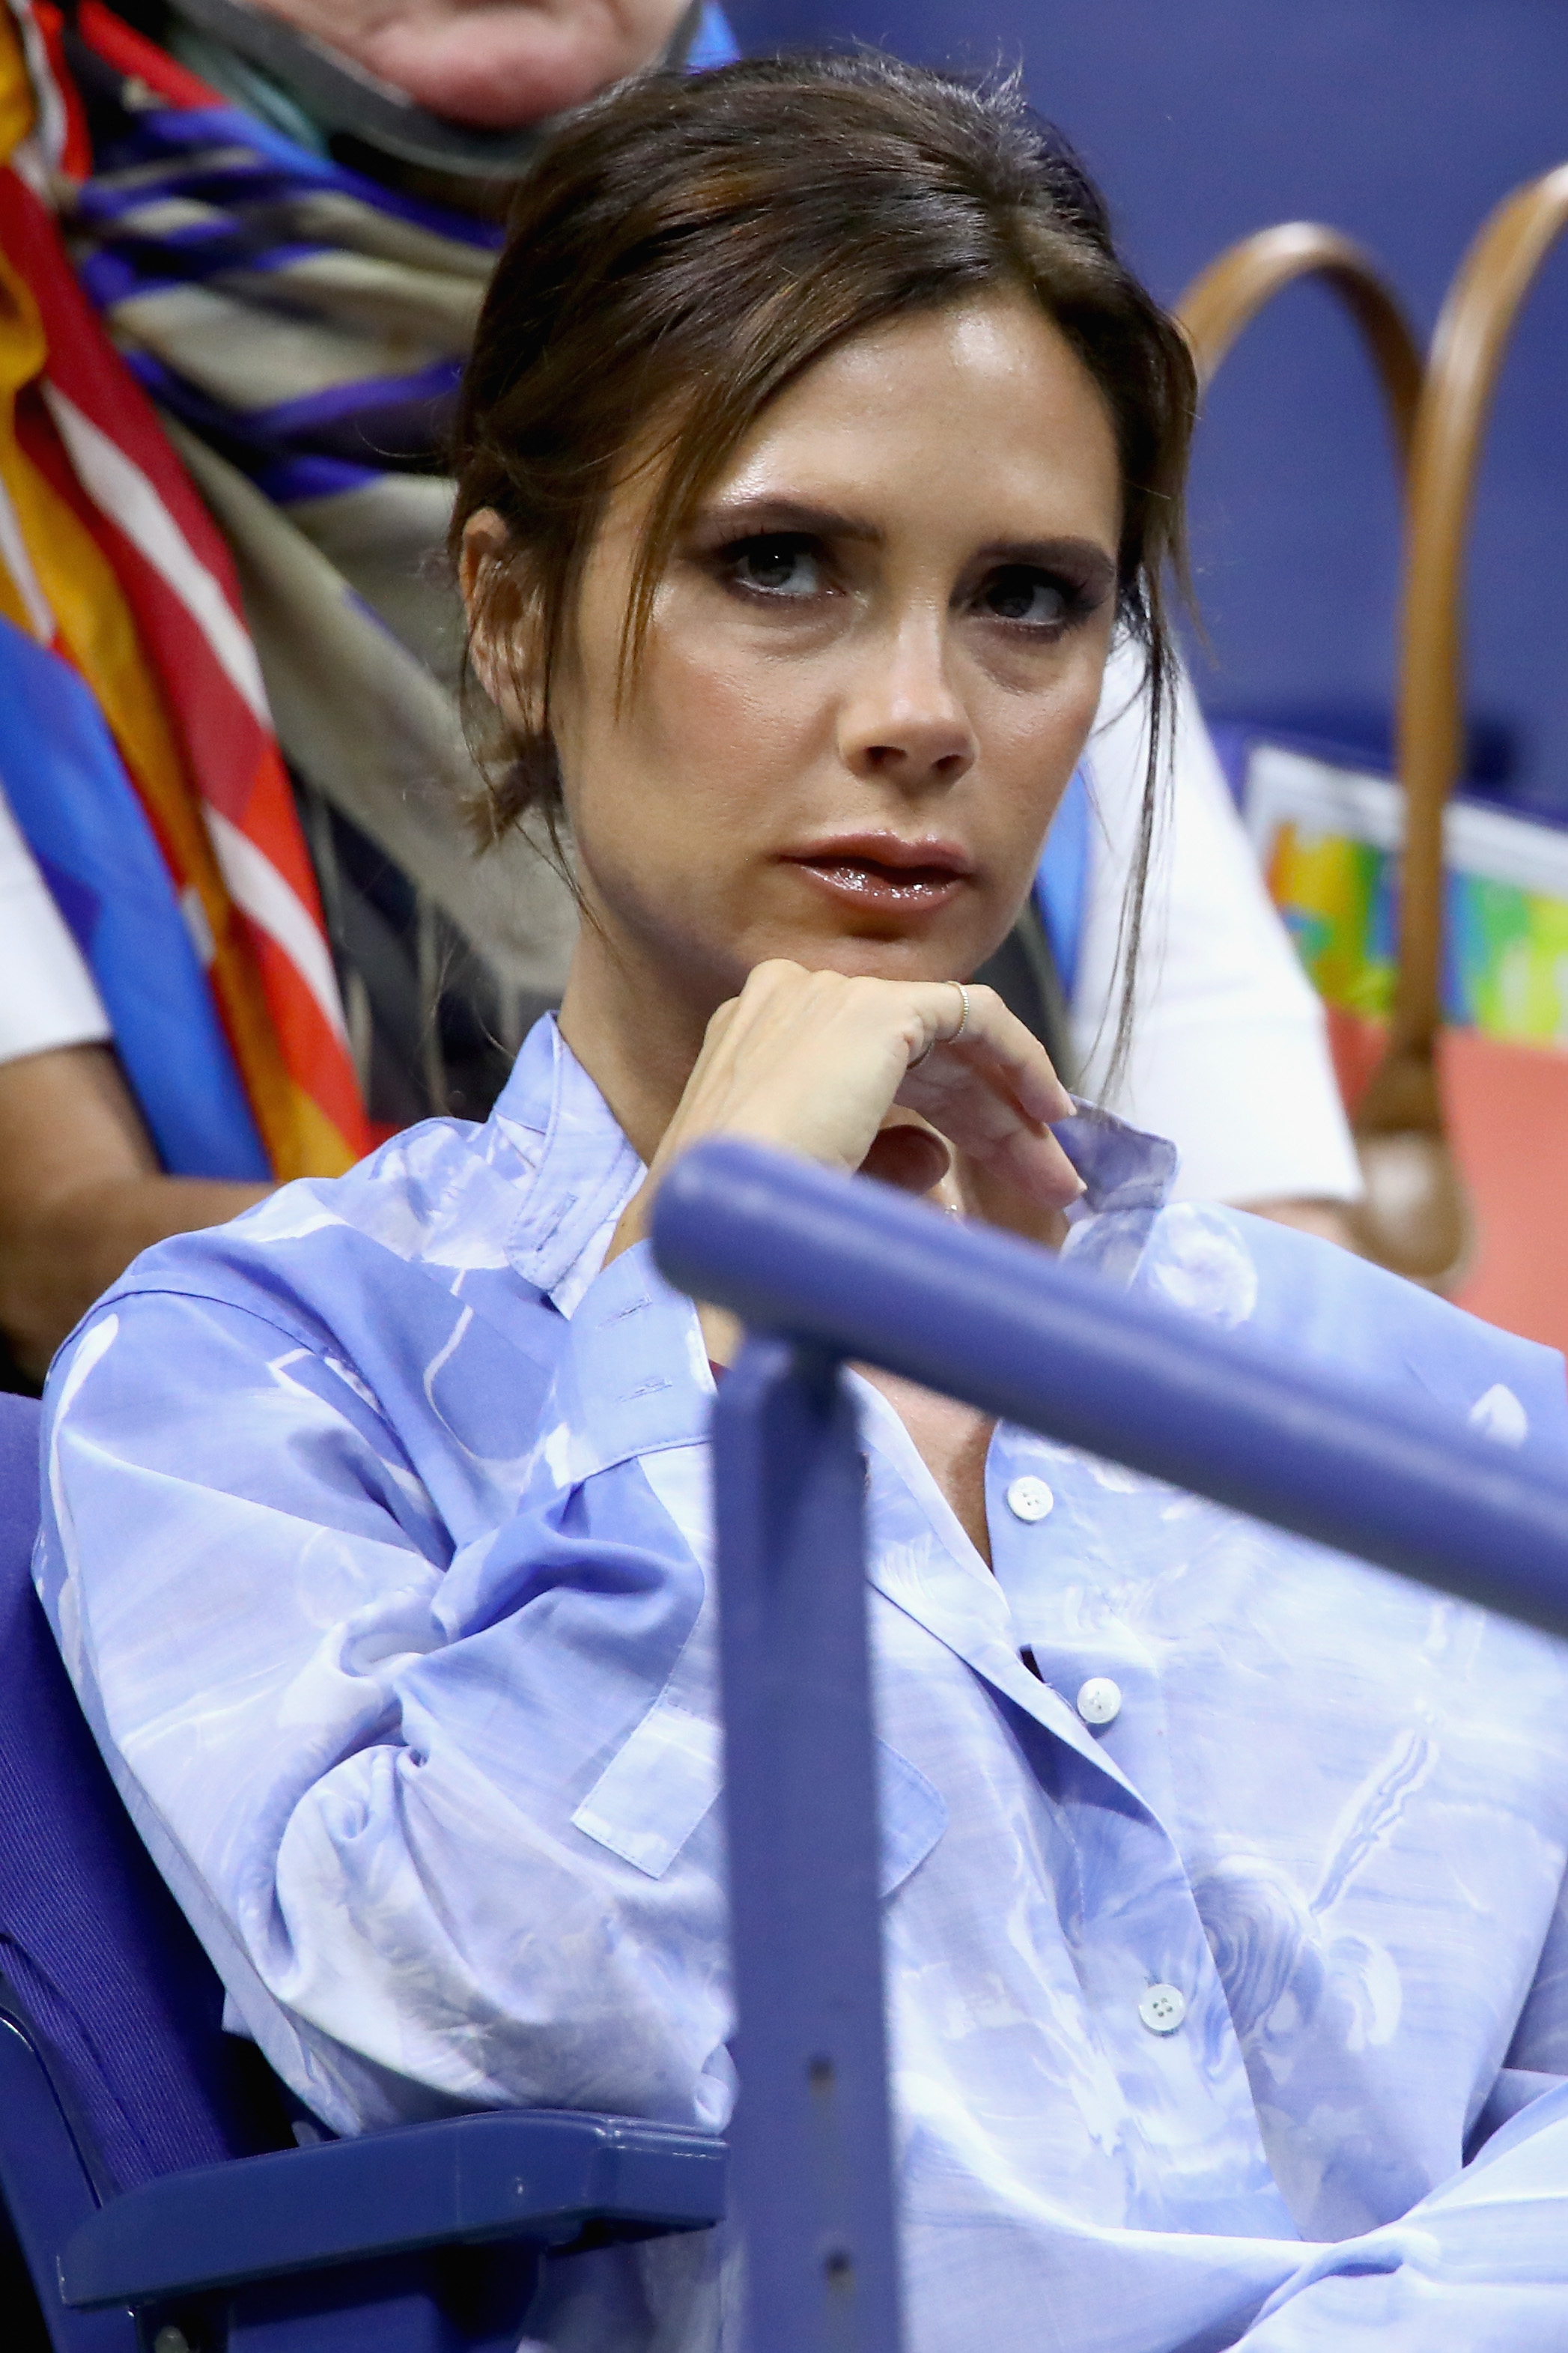 Victoria Beckham at the USTA Billie Jean King National Tennis Center on August 29, 2017 | Source: Getty Images